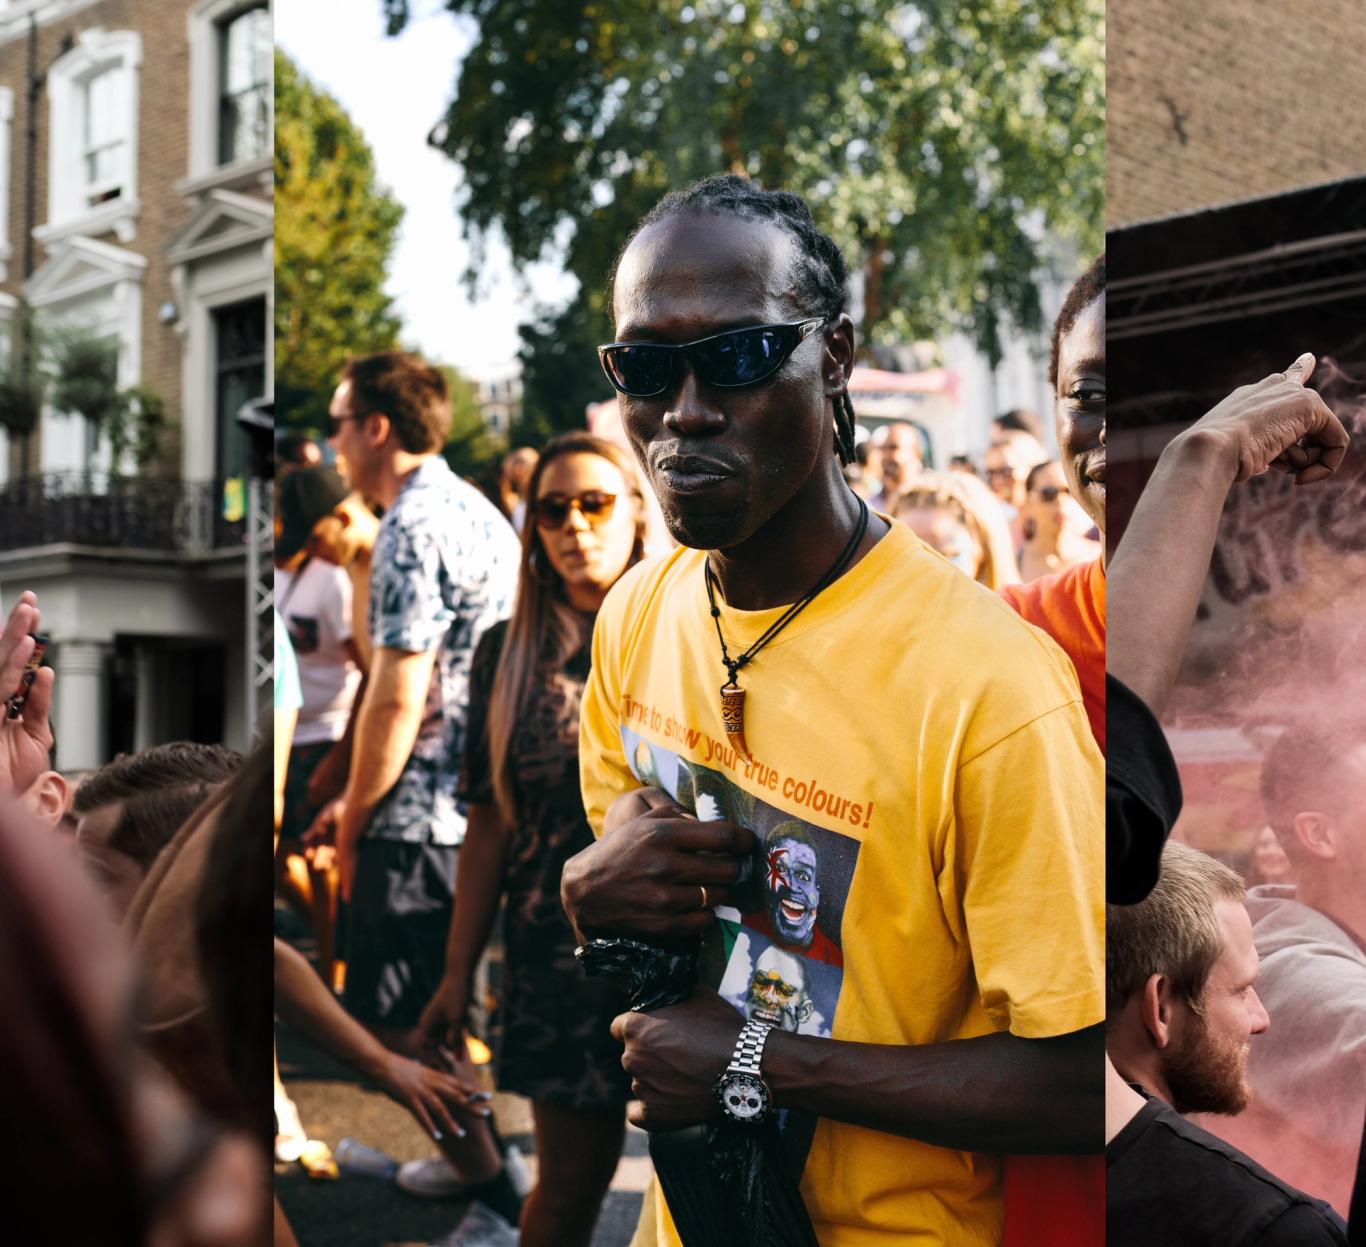 Notting Hill Carnival History - How it all began